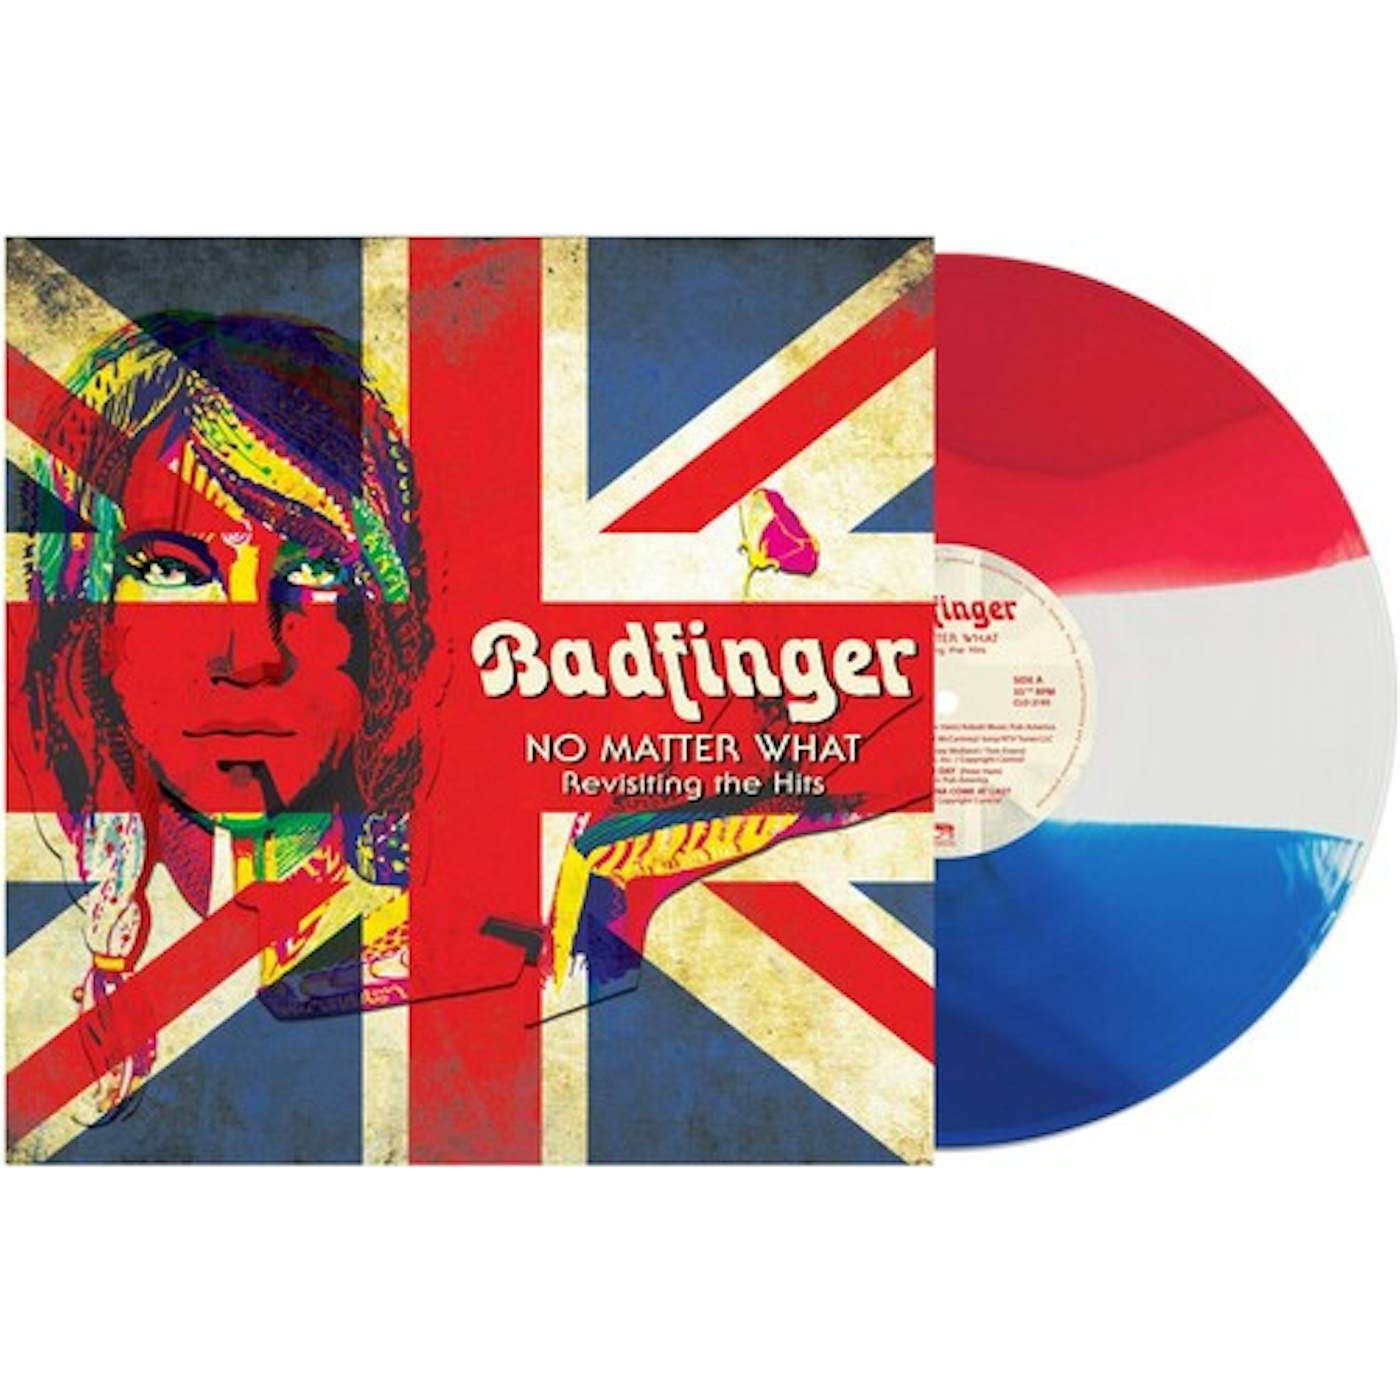 Badfinger NO MATTER WHAT - REVISITING THE HITS (TRI-COLOR) Vinyl Record